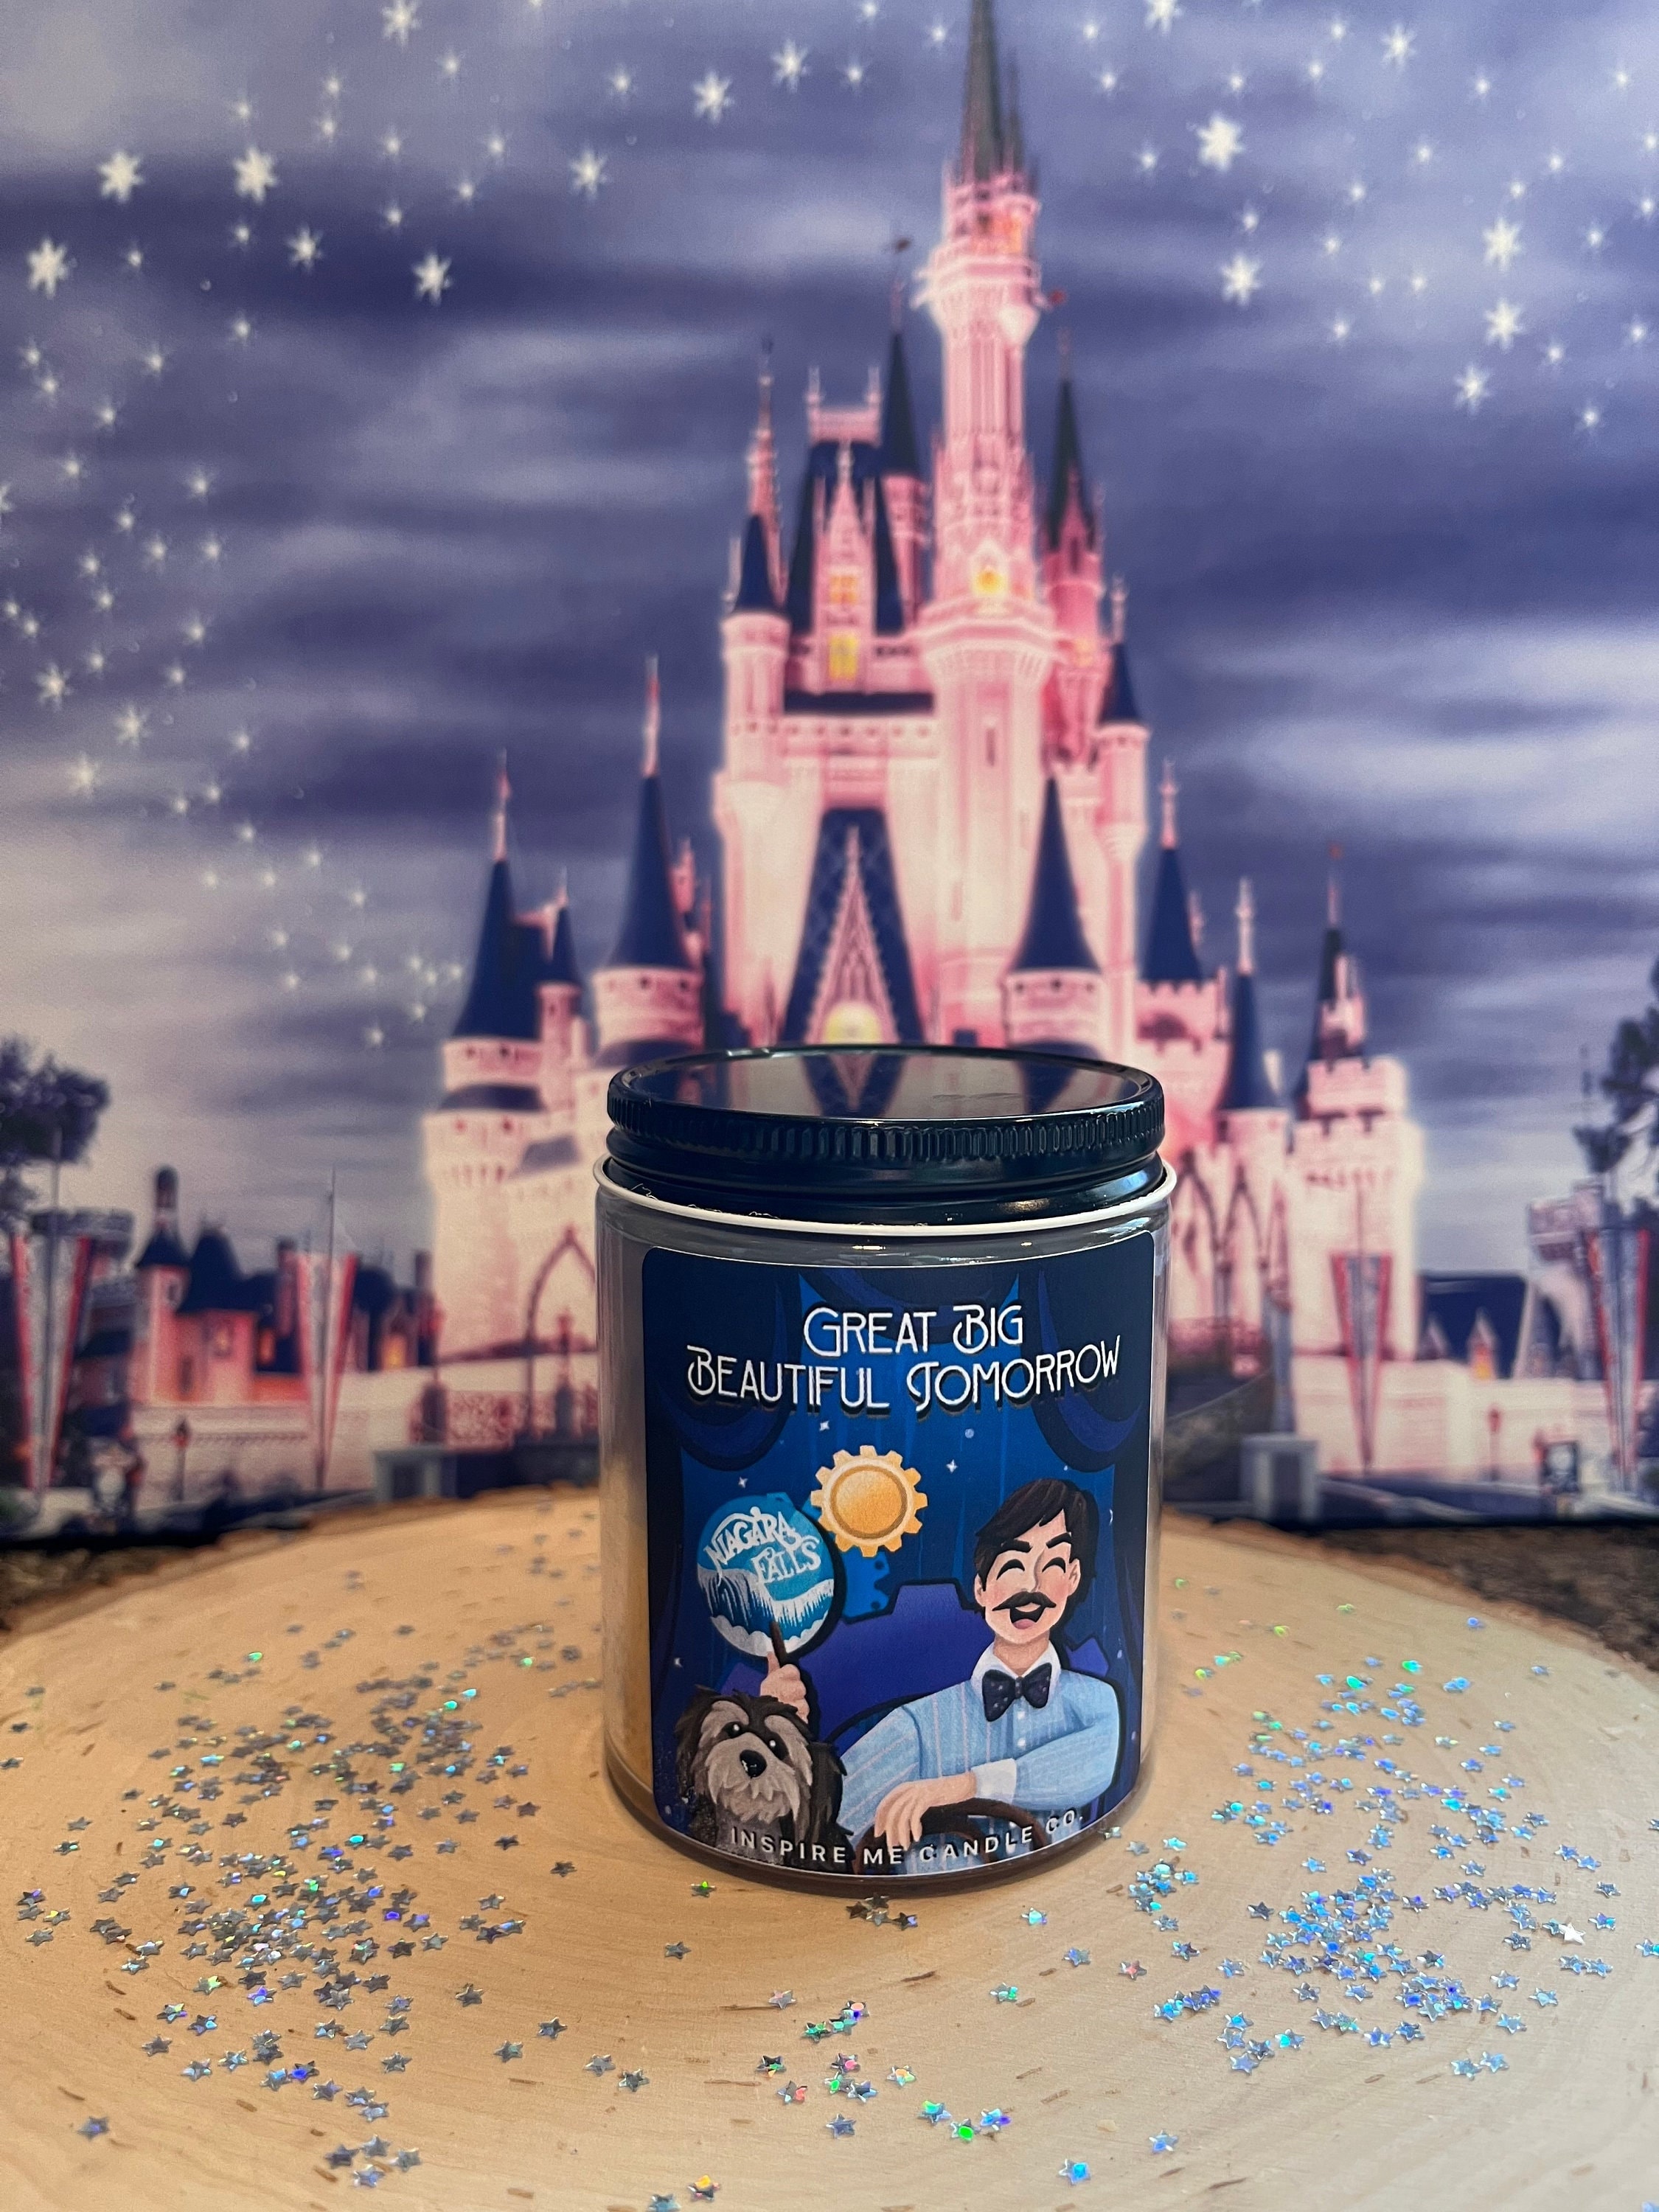 Park Scents 33 Candle - Luxury Scented Candle - Inspired by Club 33 at Disneyland - Handmade in The USA - Soy Blend | 8 oz Tin